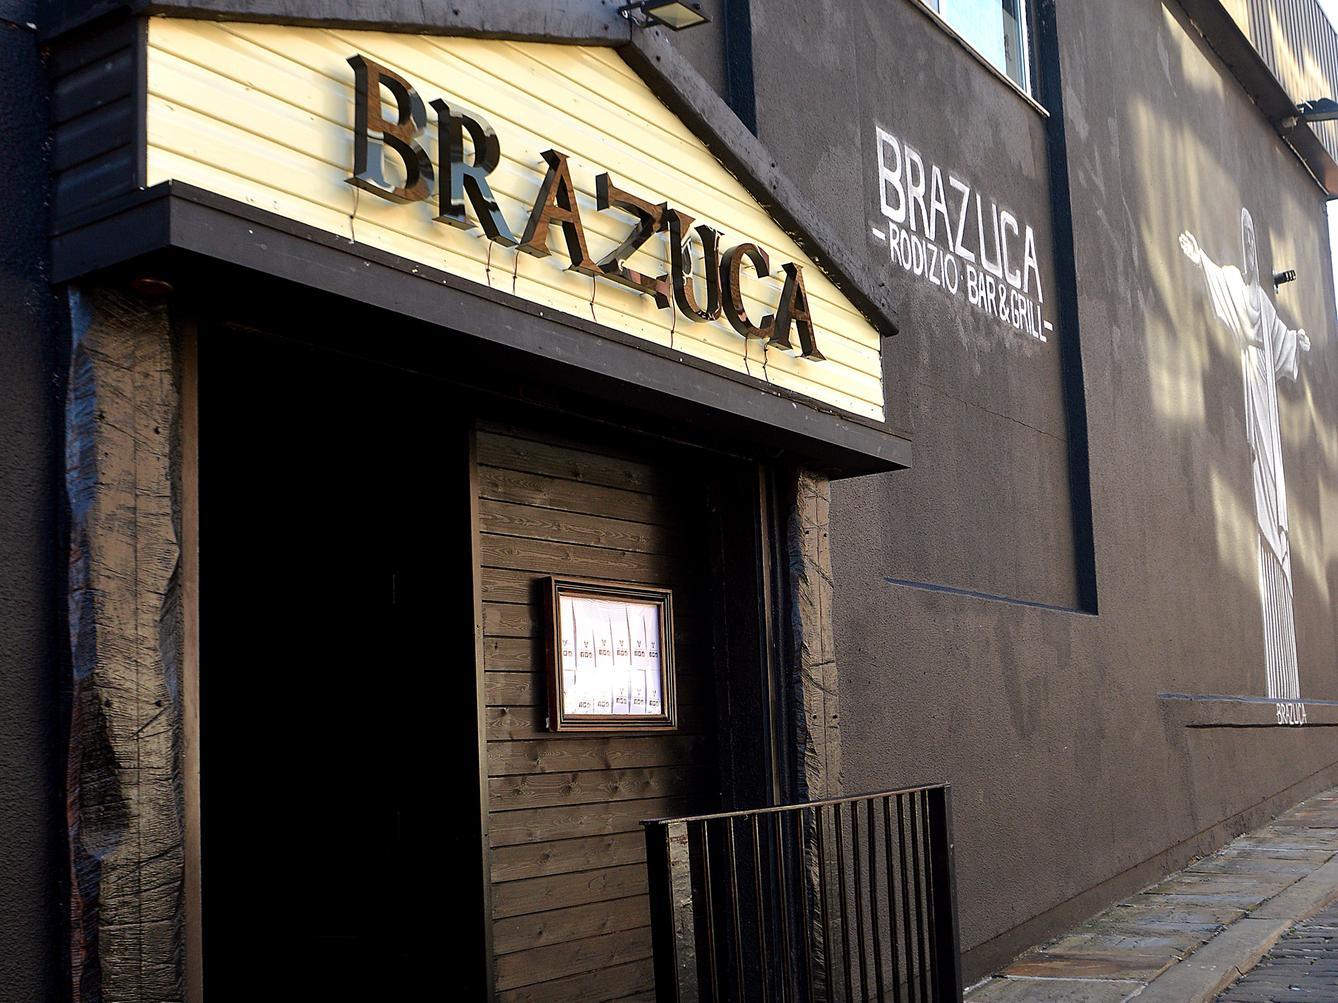 If you're looking for cocktails and Tex Mex, look no further than Brazuca. Now known as Estabulo, the eatery is a hit with fans of burgers and ribs.